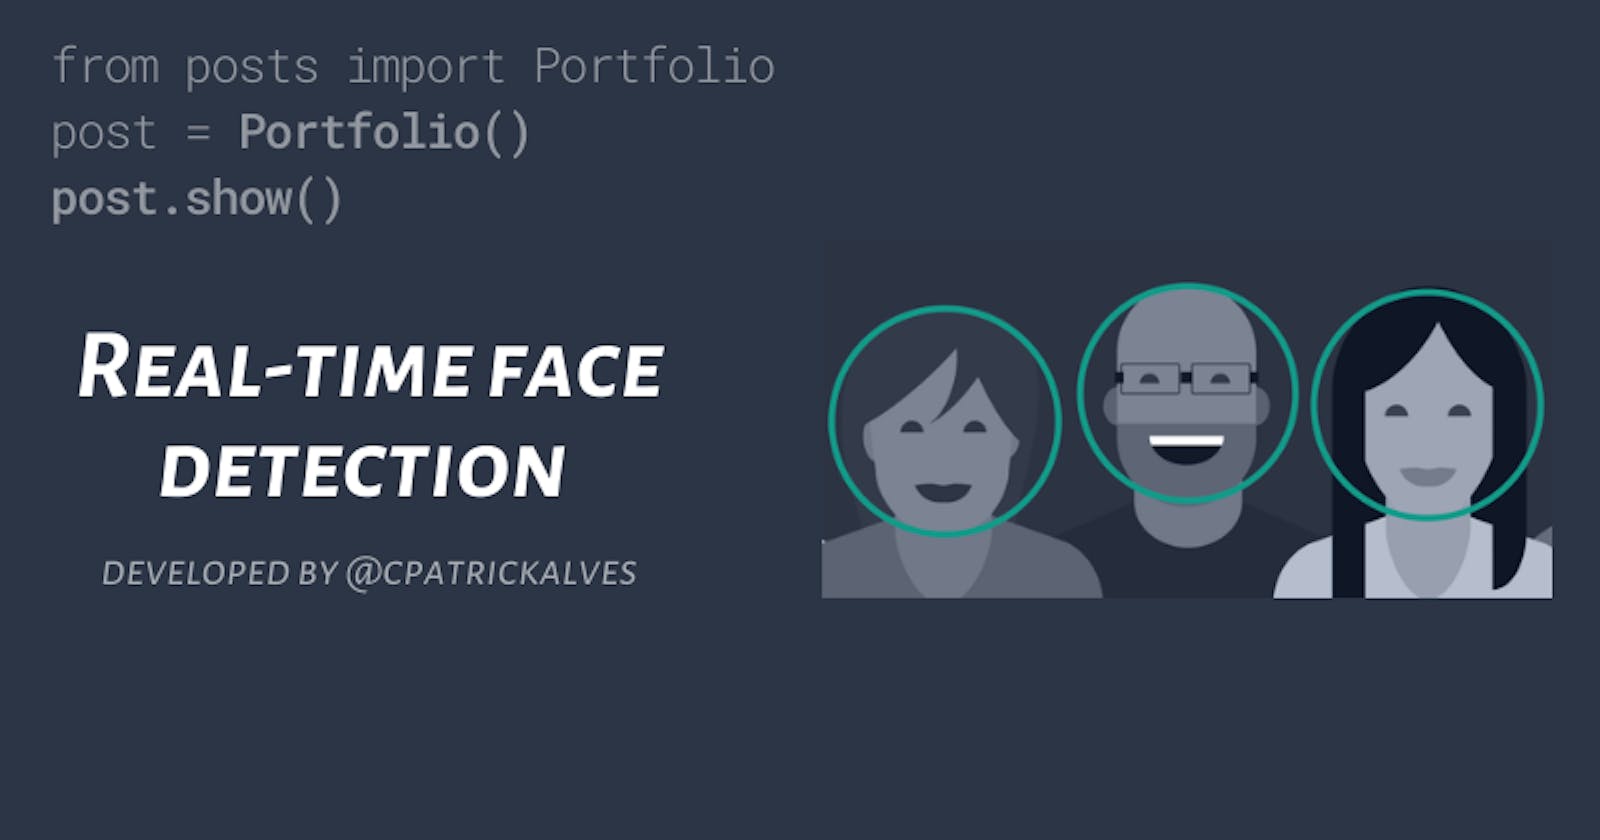 Real-time face detection